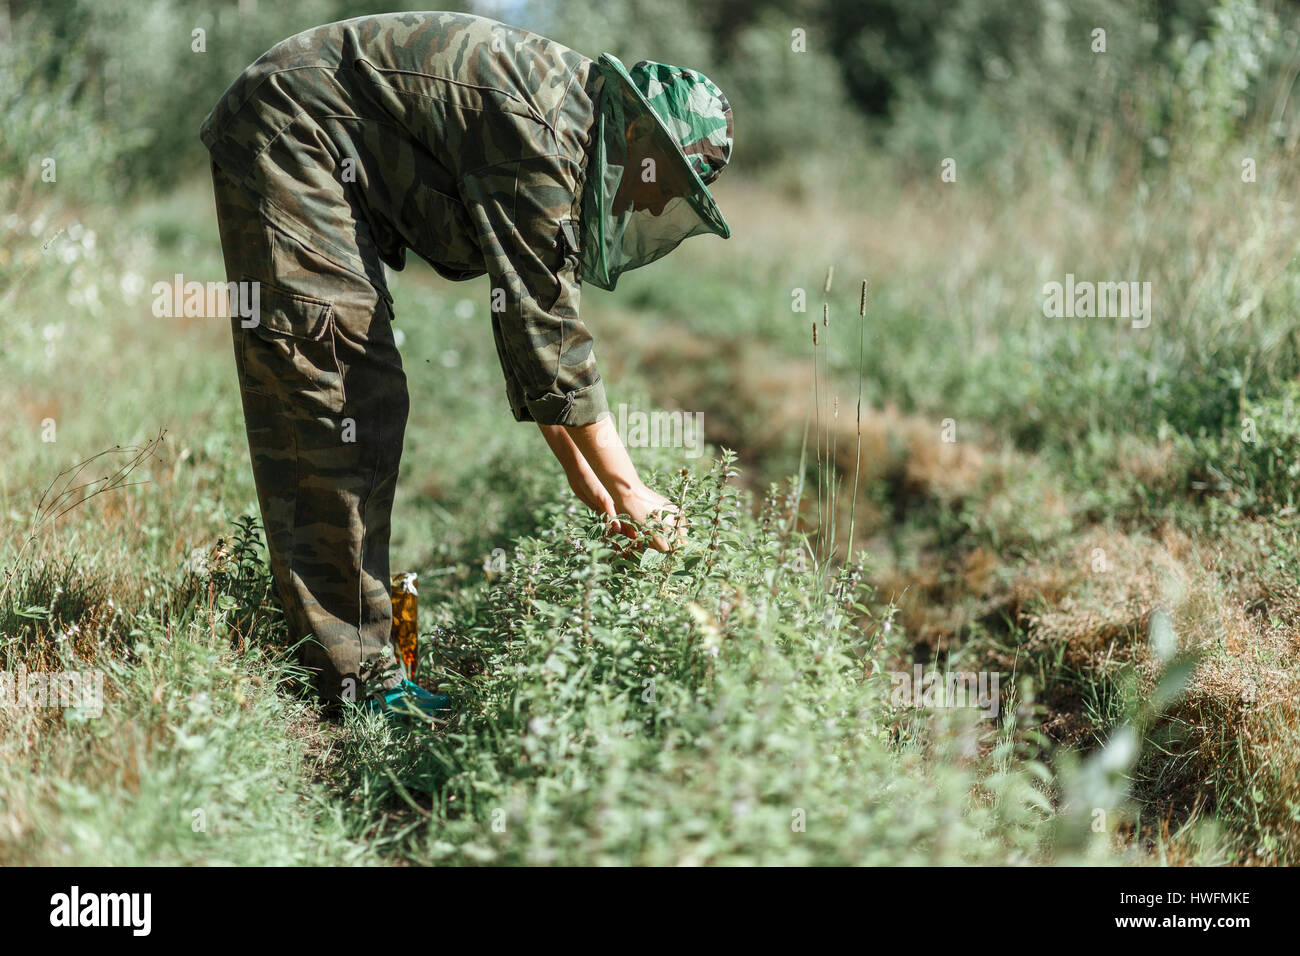 Woman in camouflage protection clothes gathering mint leaves by hands, selected focus with nature green forest background, shiny sunny light Stock Photo